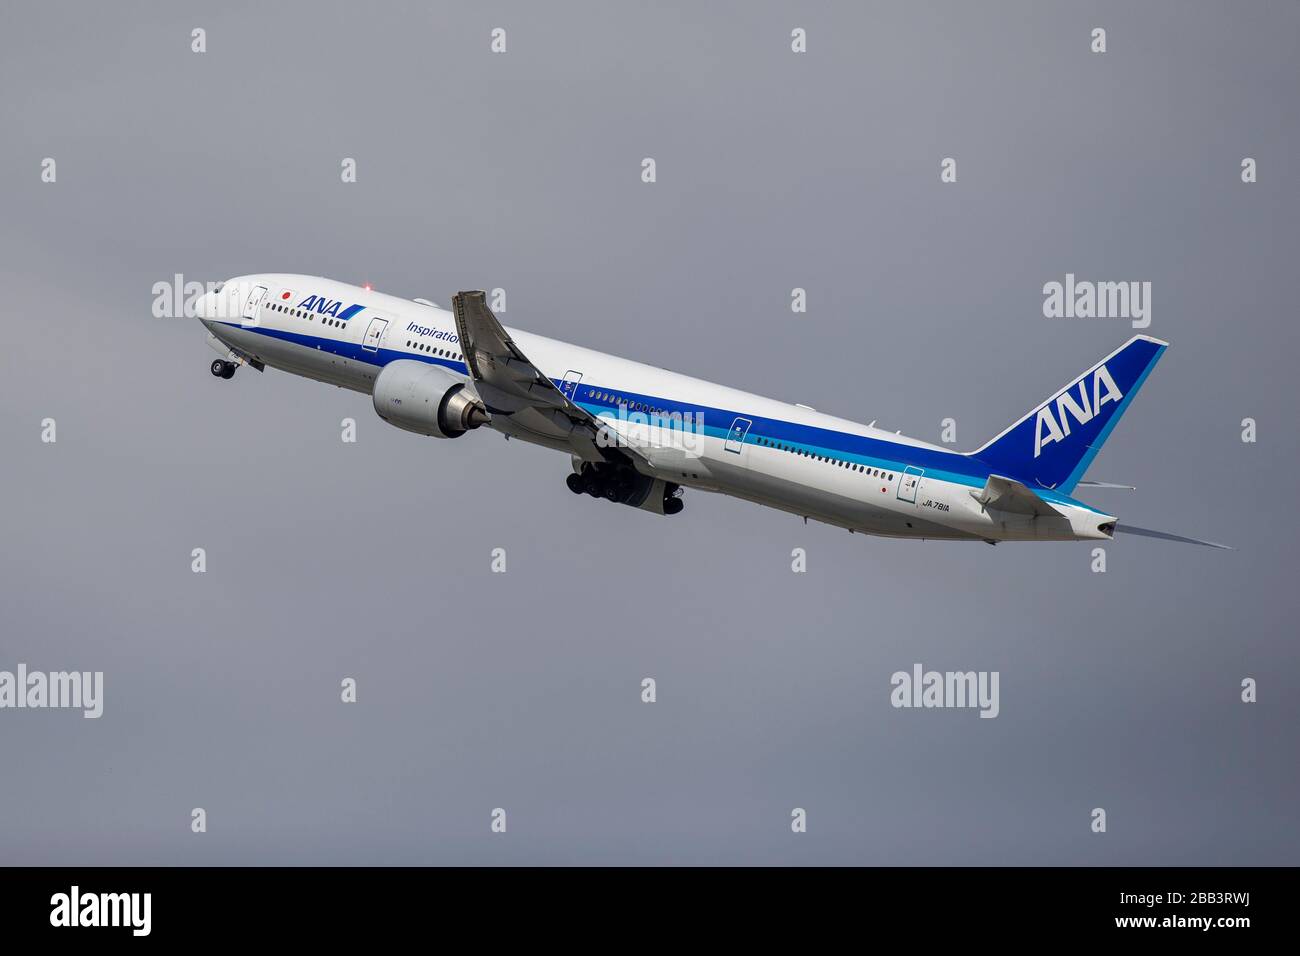 An Ana Boeing 777 300ew Aircraft Takes Off For Tokyo From Los Angeles International Airport Lax On Friday February 28 In Los Angeles California Usa Photo By Ios Espa Images Stock Photo Alamy